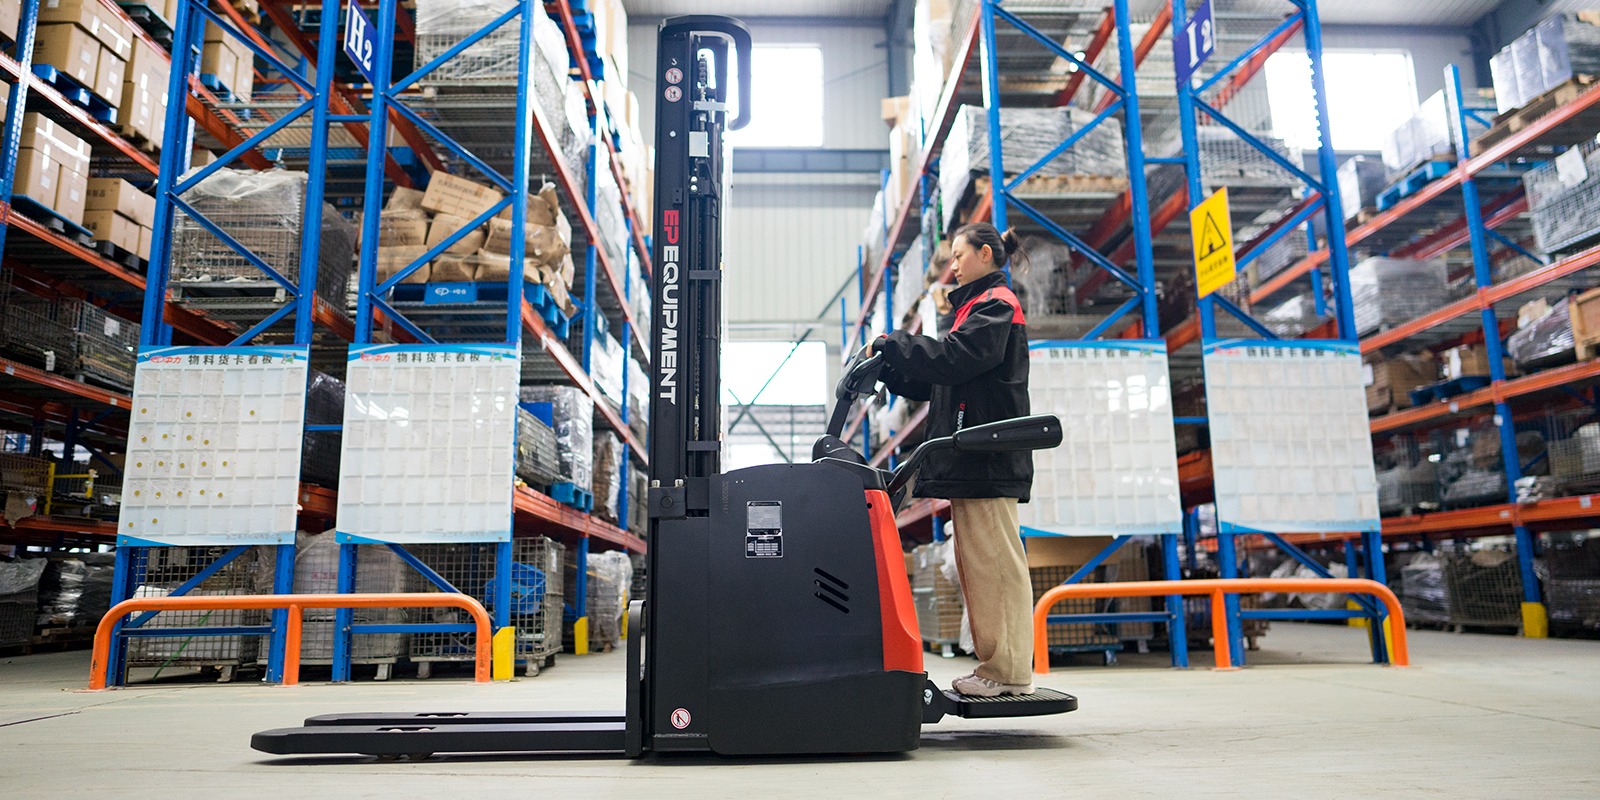 ES16-RS Electric Stacker